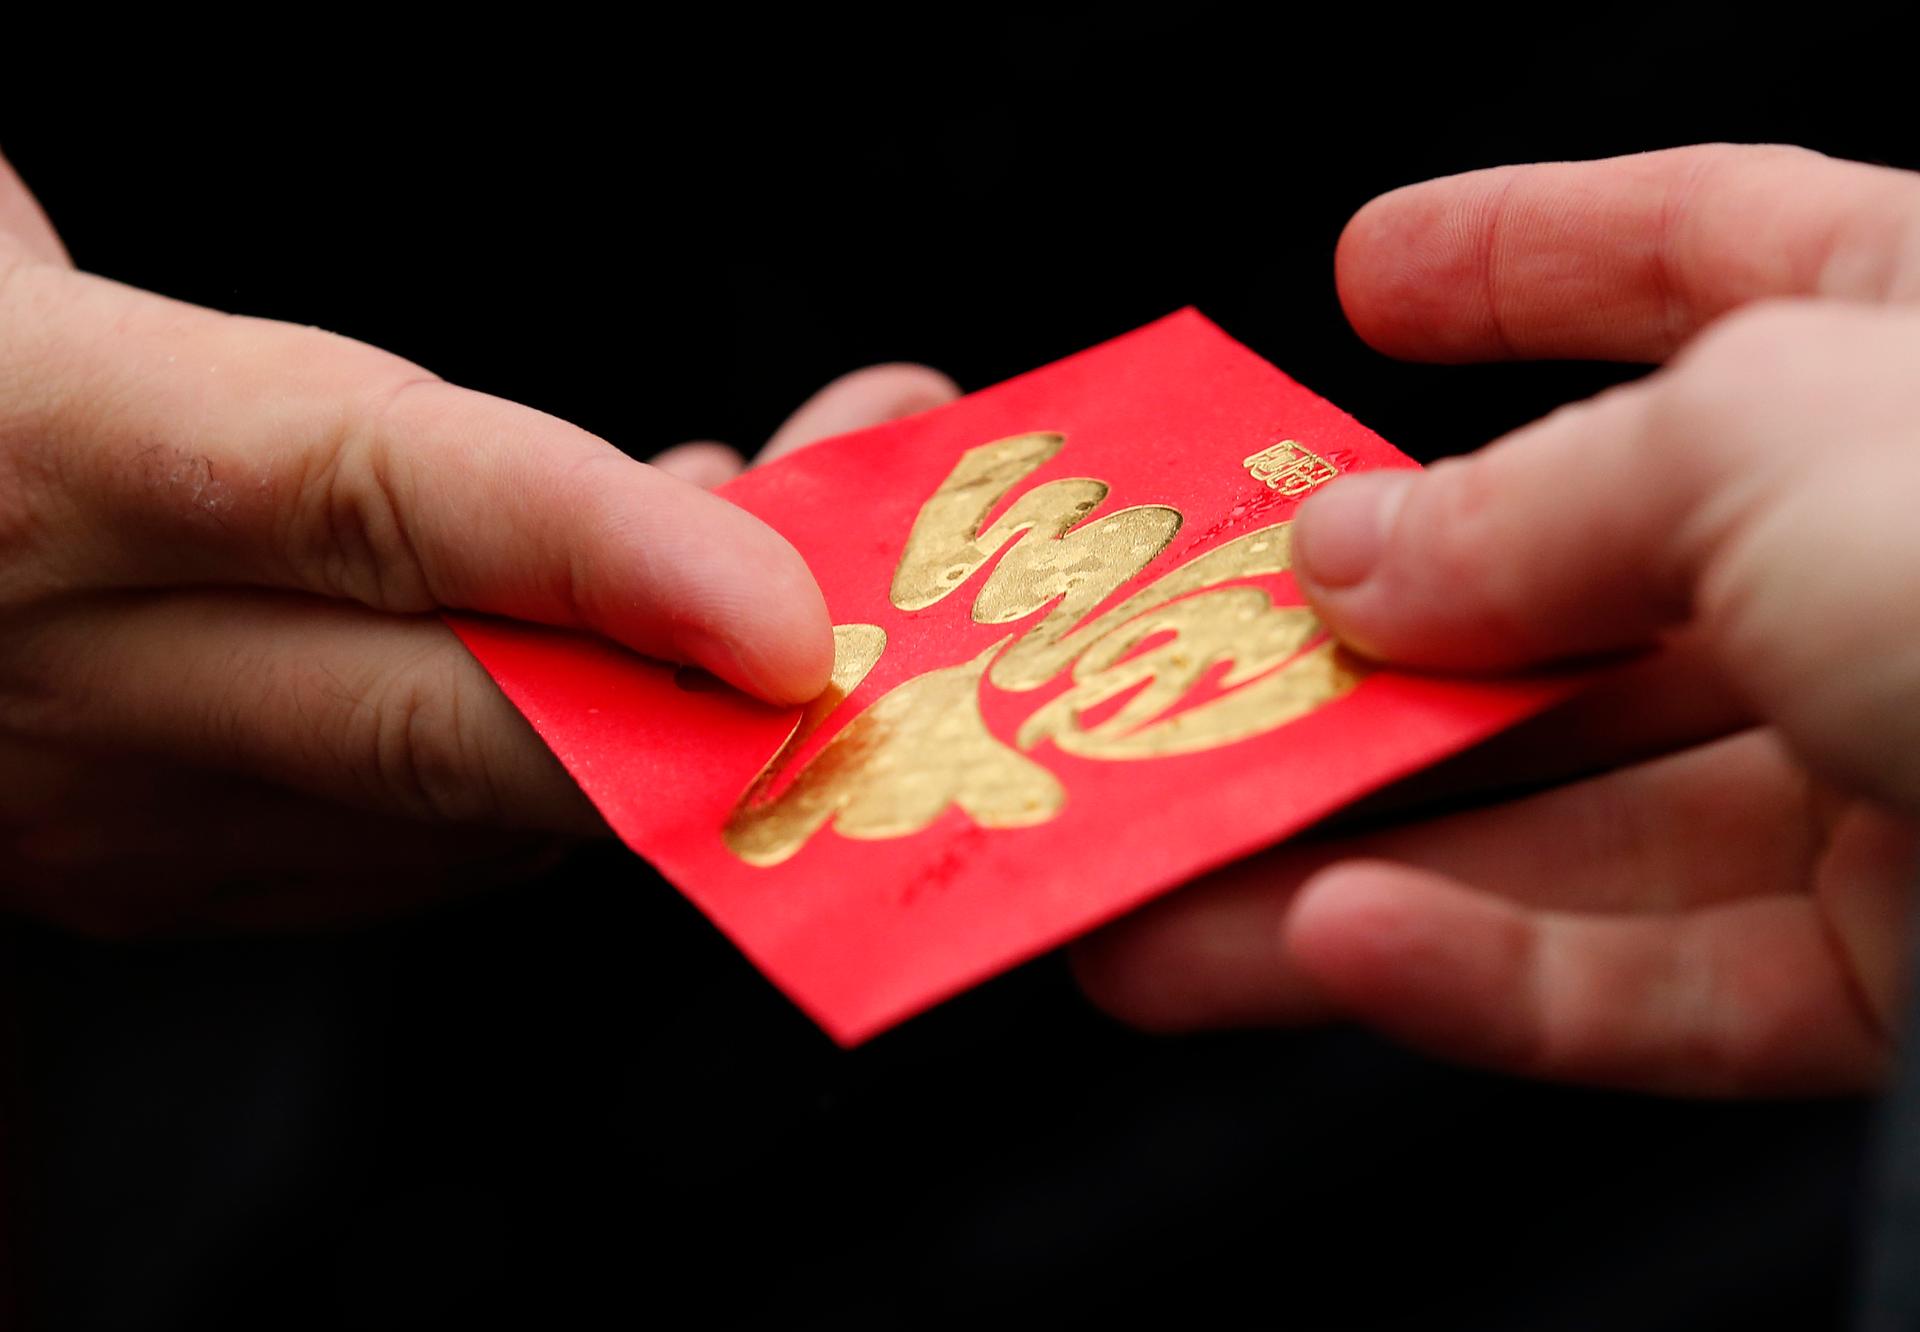 A red envelope is given out during Chinese Lunar New Year celebrations in Liverpool, England, on February 22, 2015.